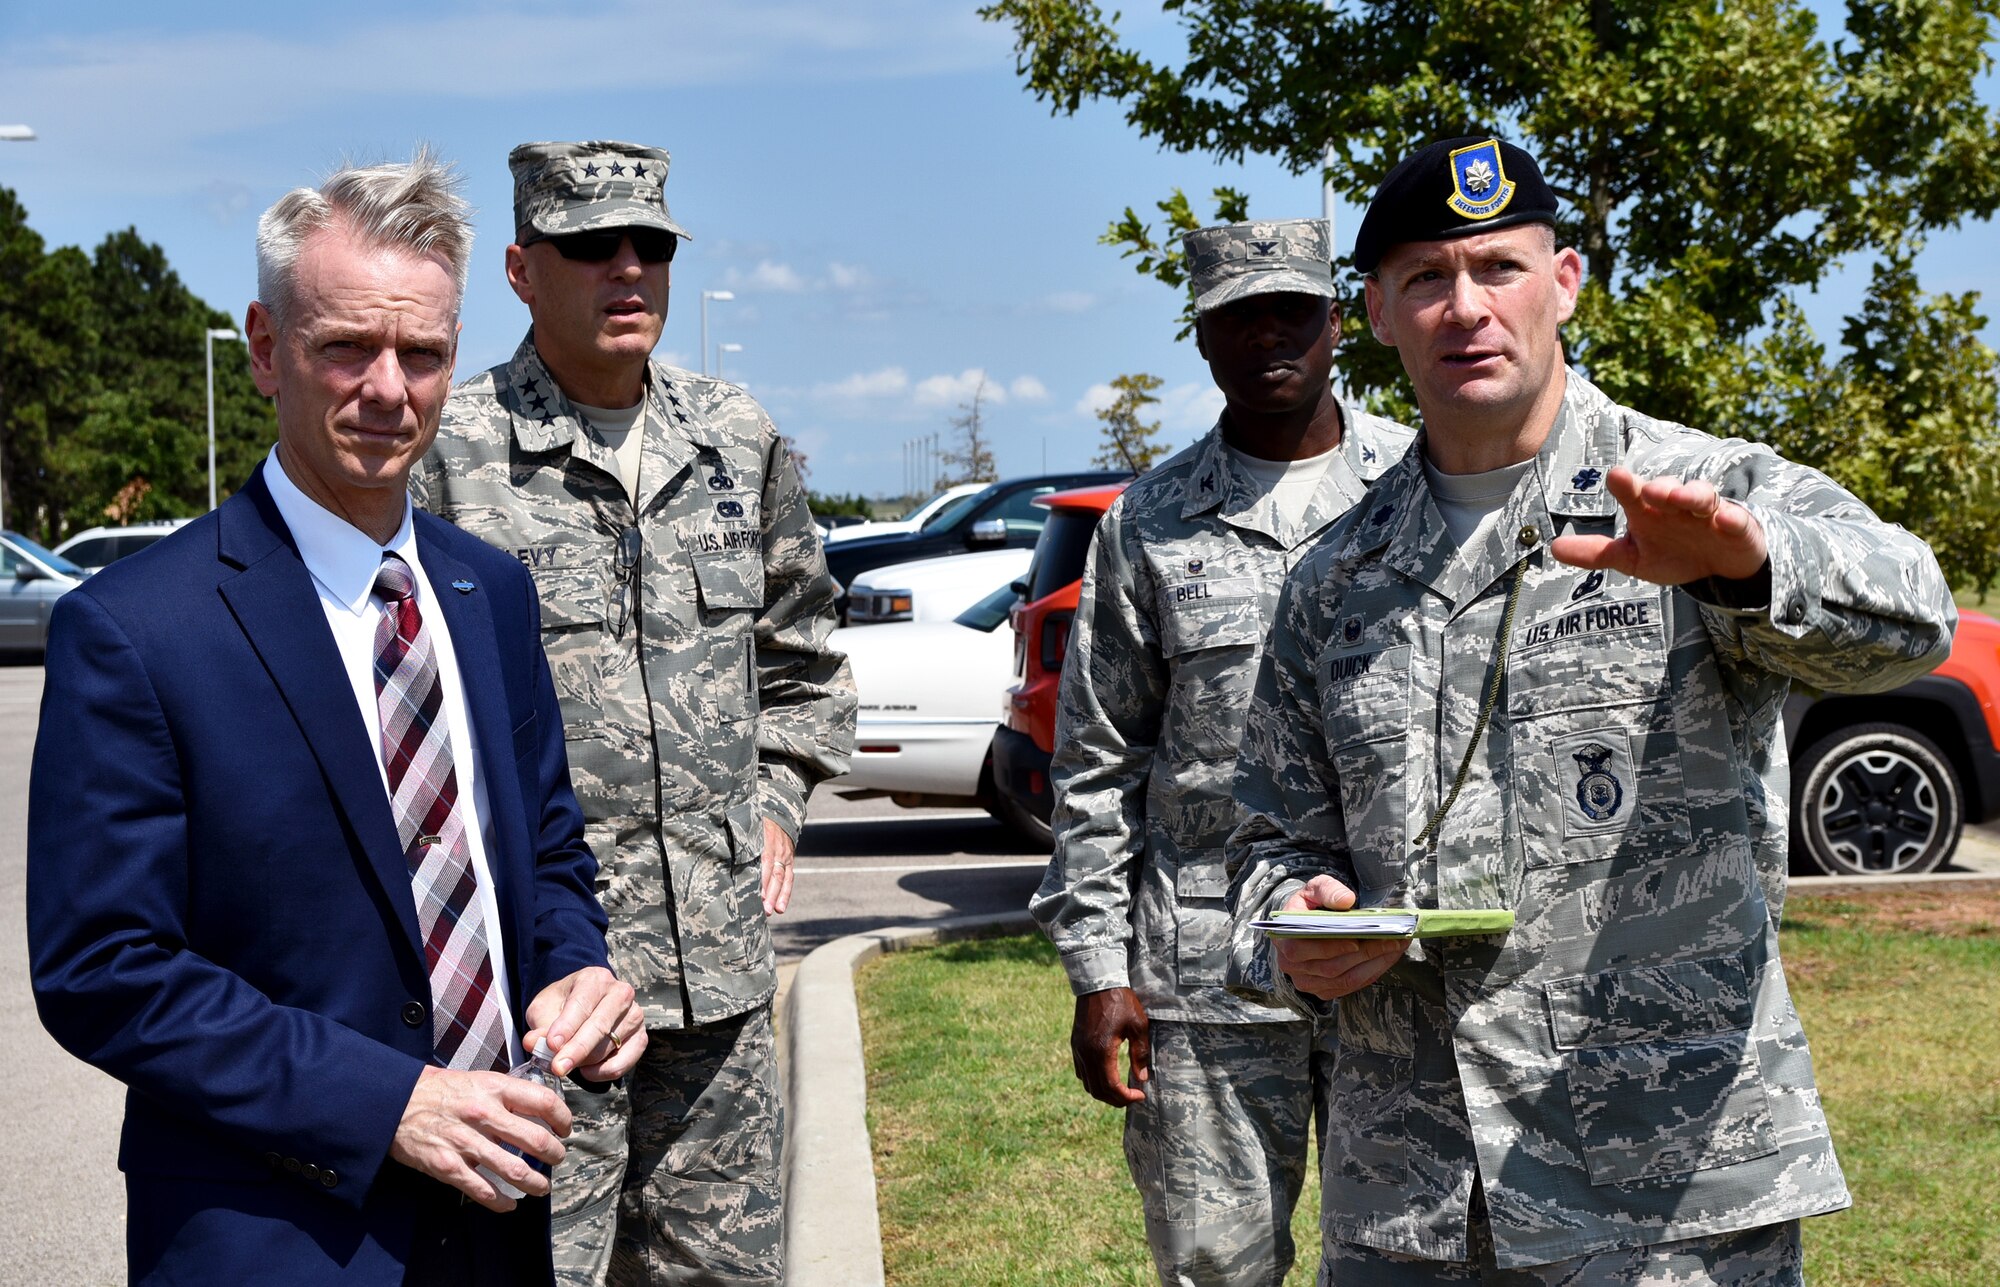 Lt. Col. Keith Quick, 72nd Security Forces Squadron commander, right, Lt. Gen. Lee K. Levy II, Air Force Sustainment Center commander, second from left, and Col. Kenyon Bell, 72nd Air Base Wing commander, discuss perimeter security issues with U.S. Rep. Steve Russell, R-Okla., during a brief visit to Tinker Air Force Base Aug. 10.